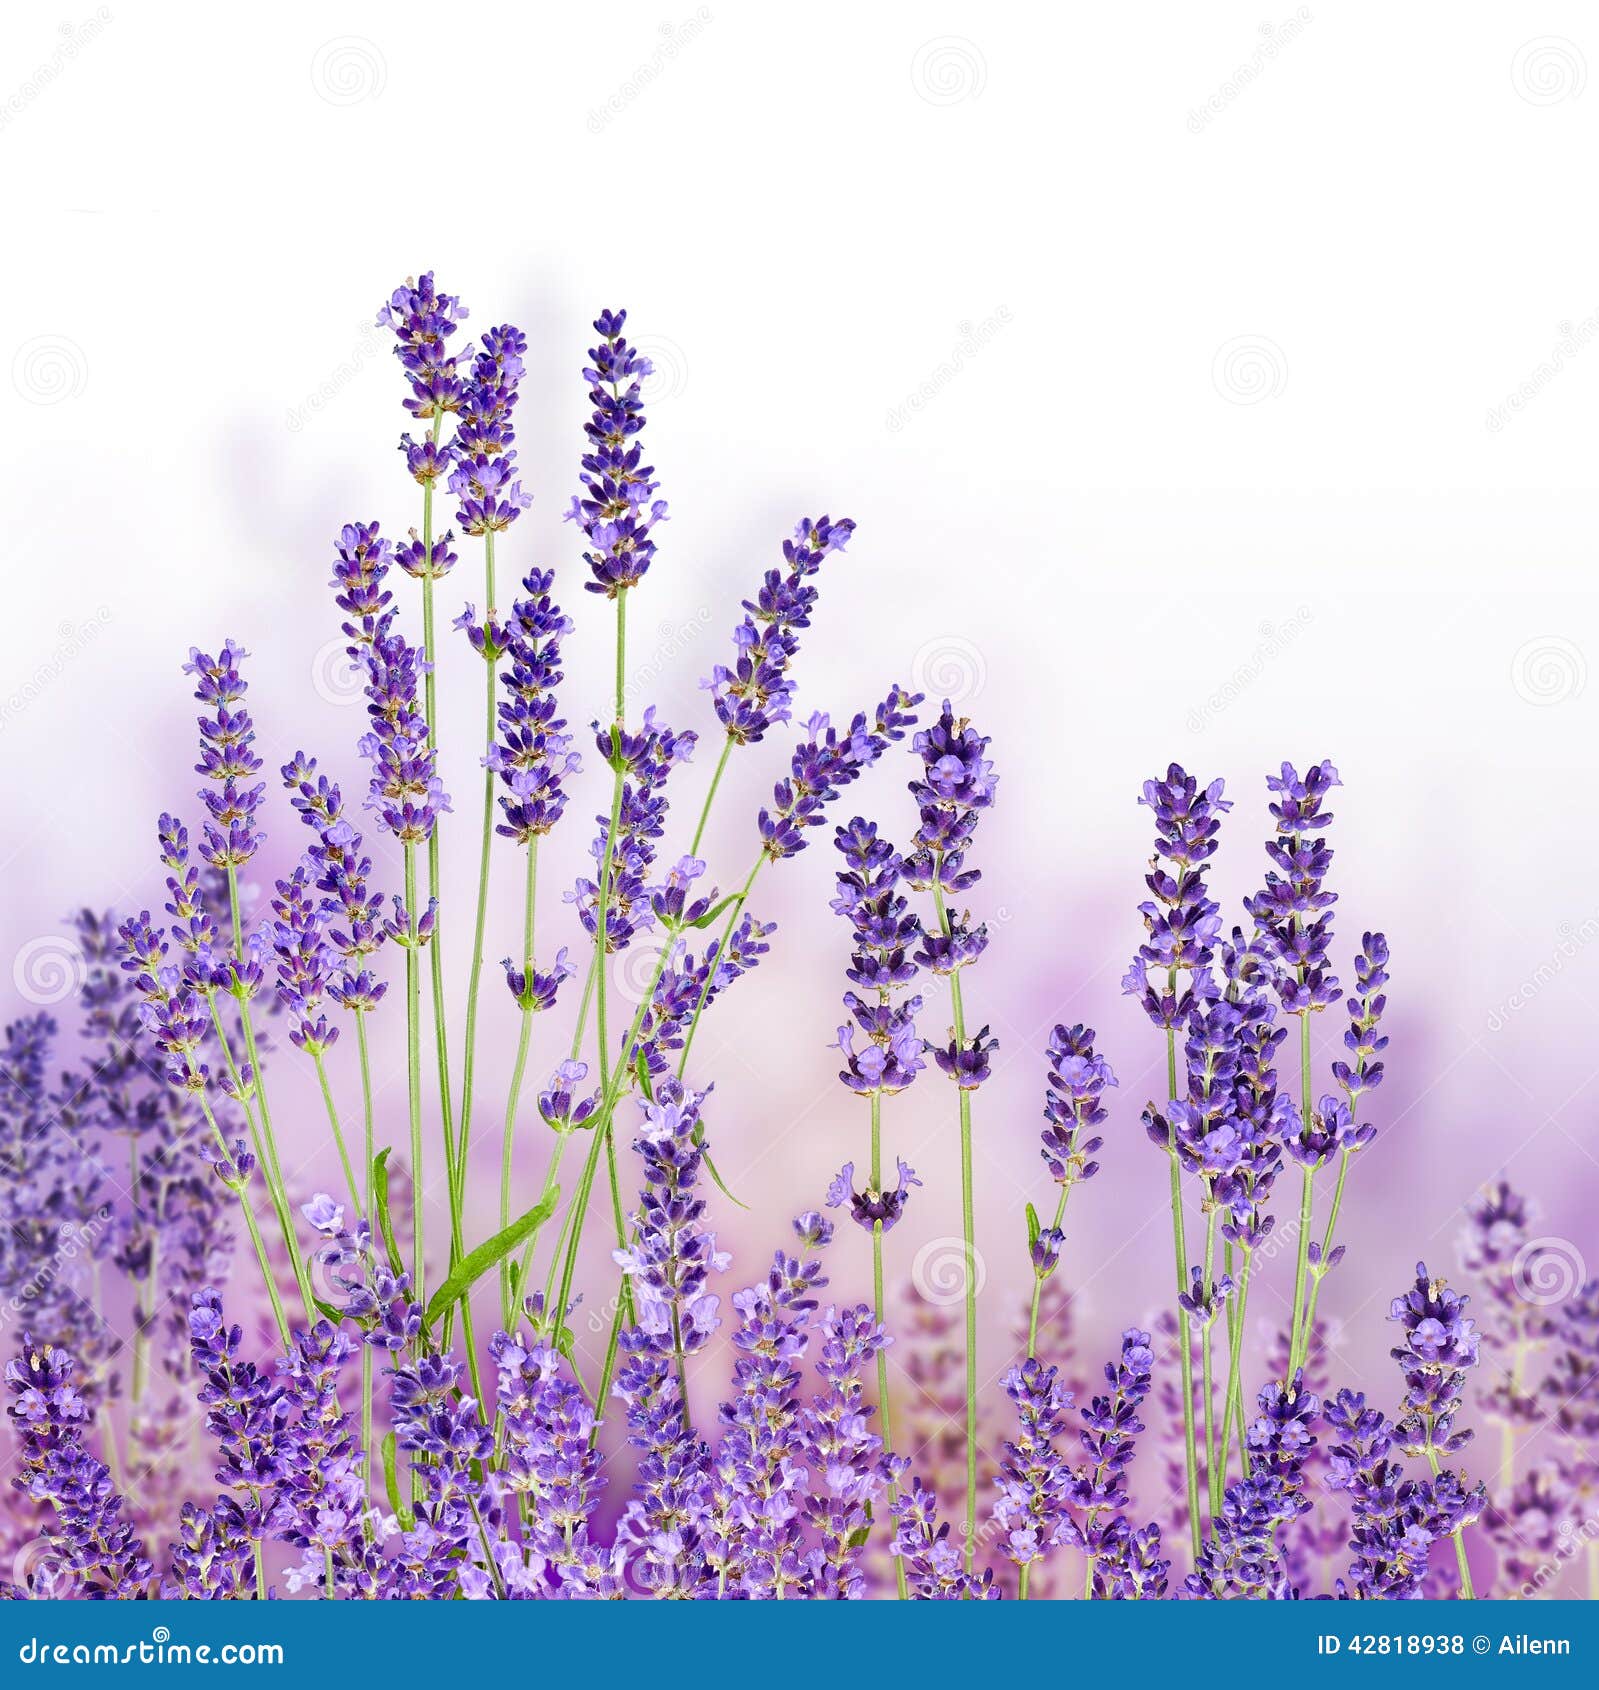 bunch of lavender flowers on white background